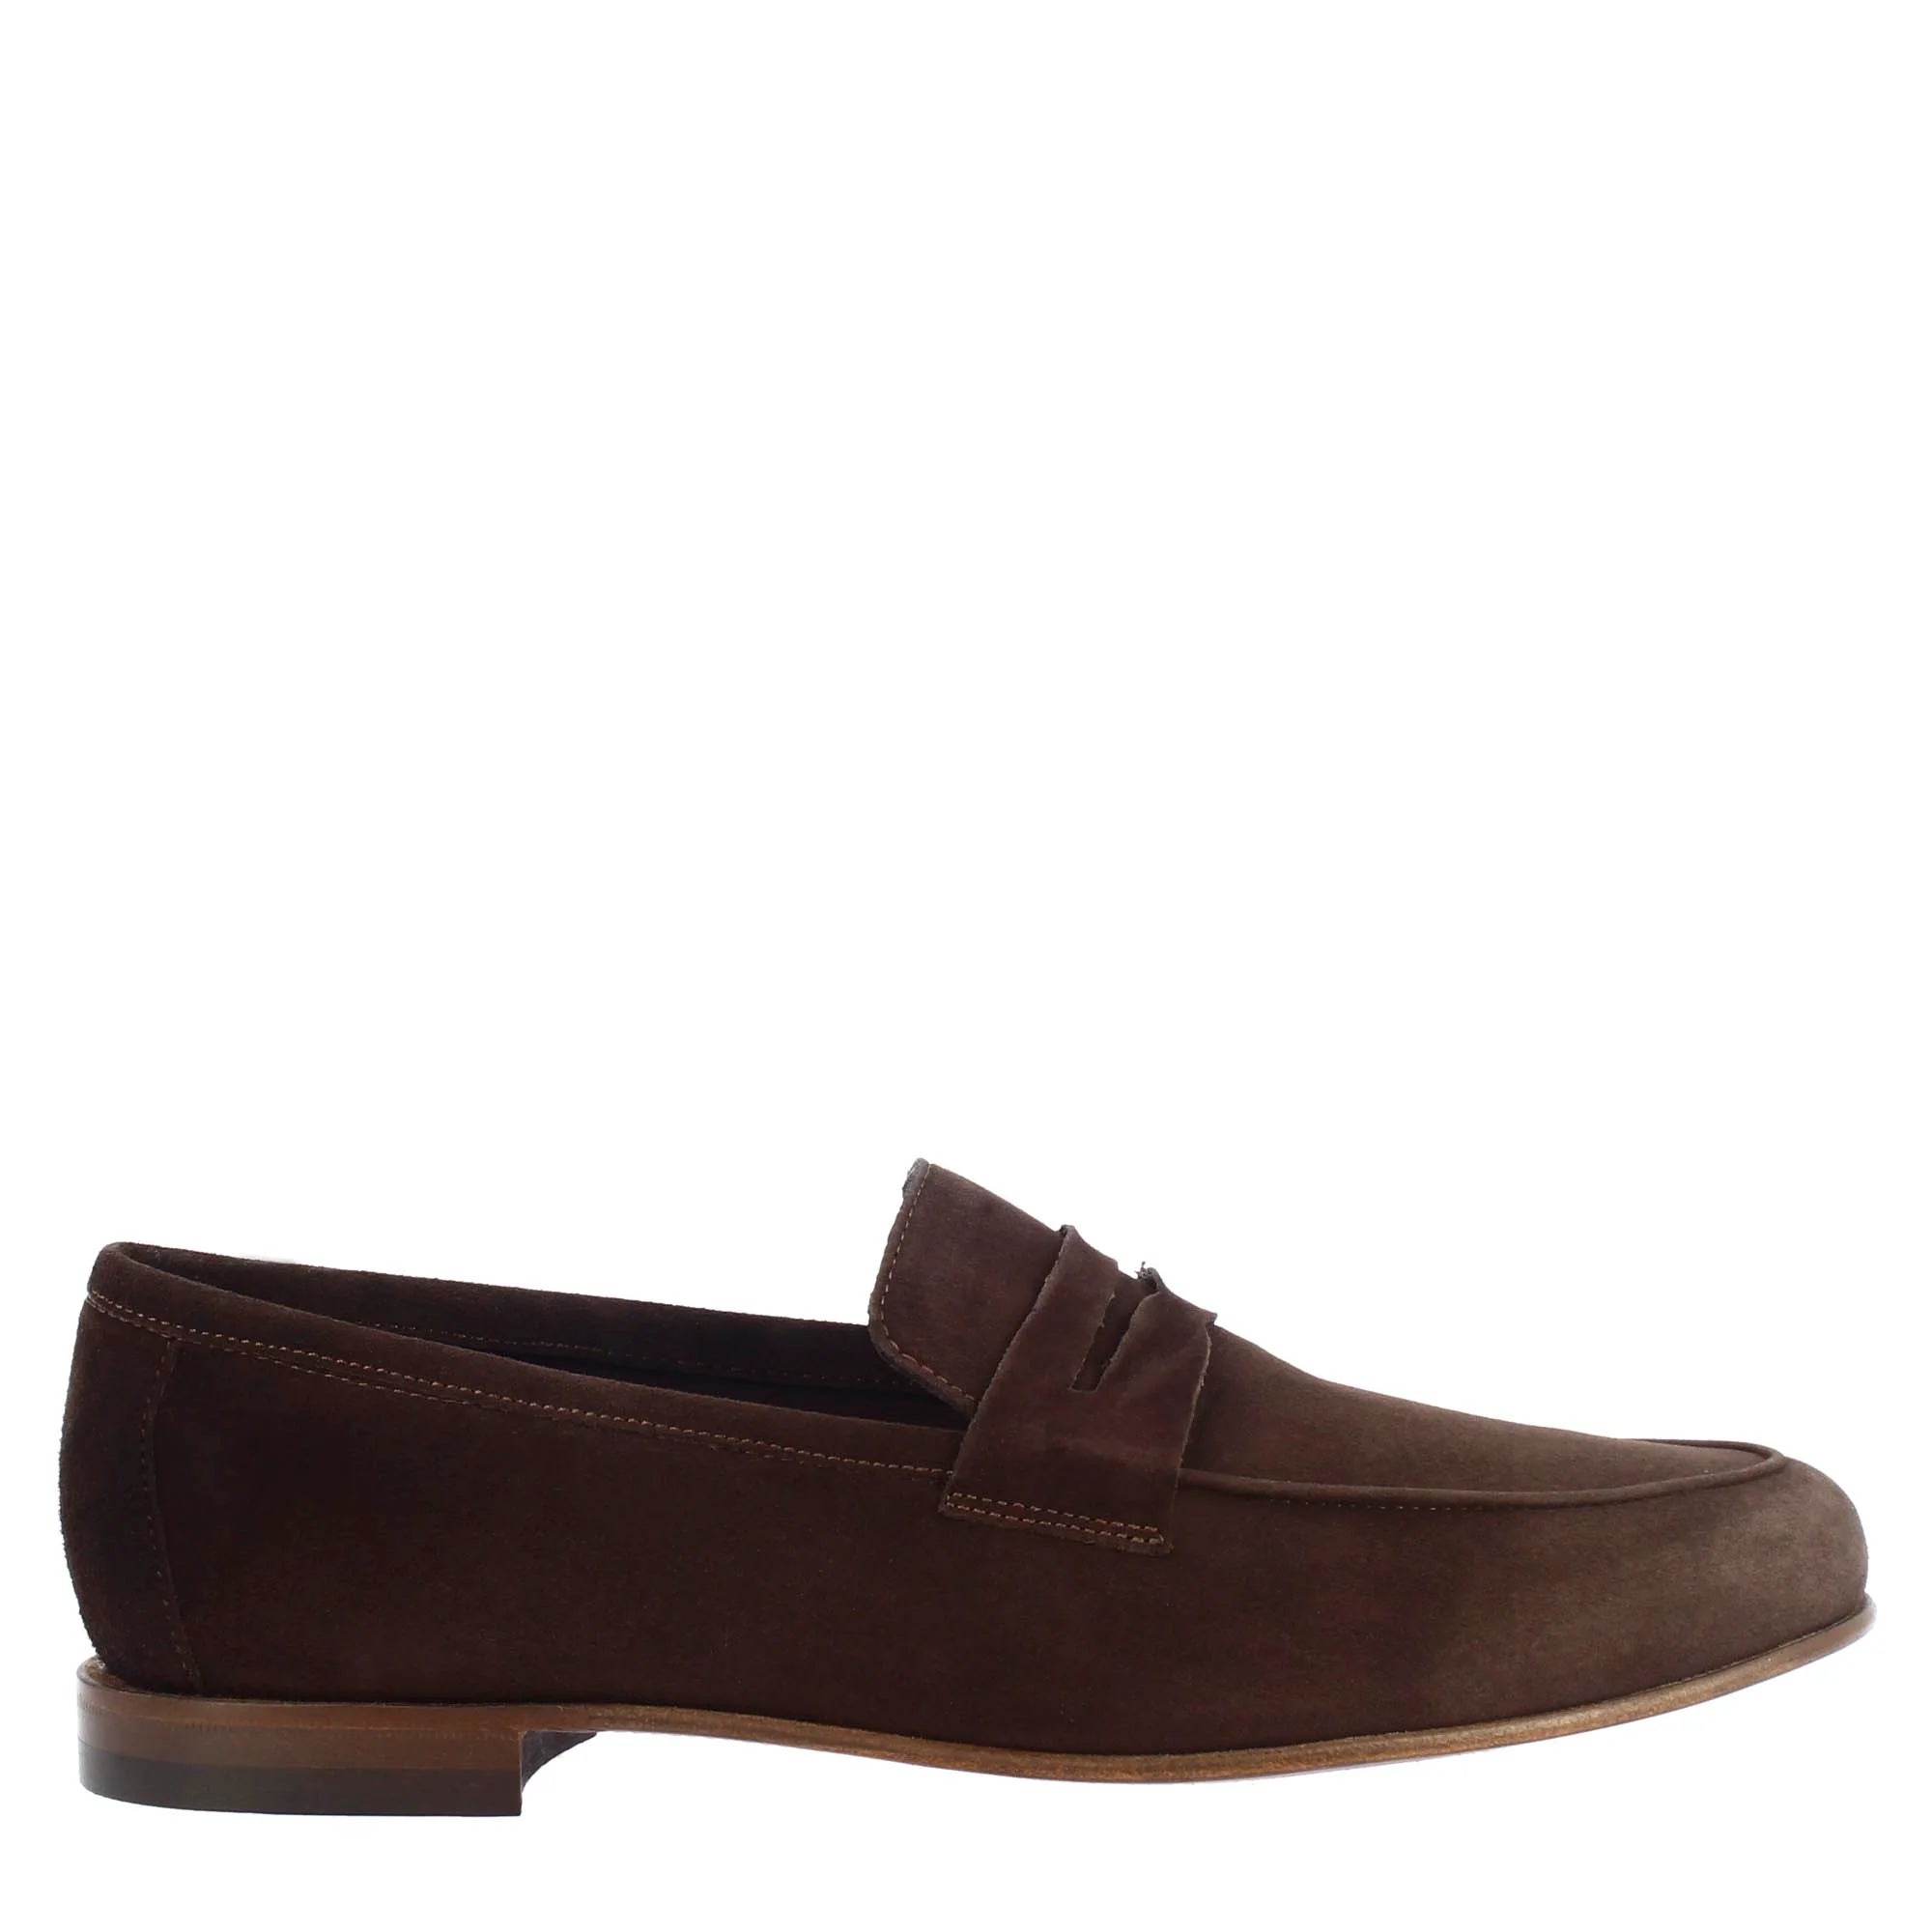 Dark Brown Suede Leather Loafers